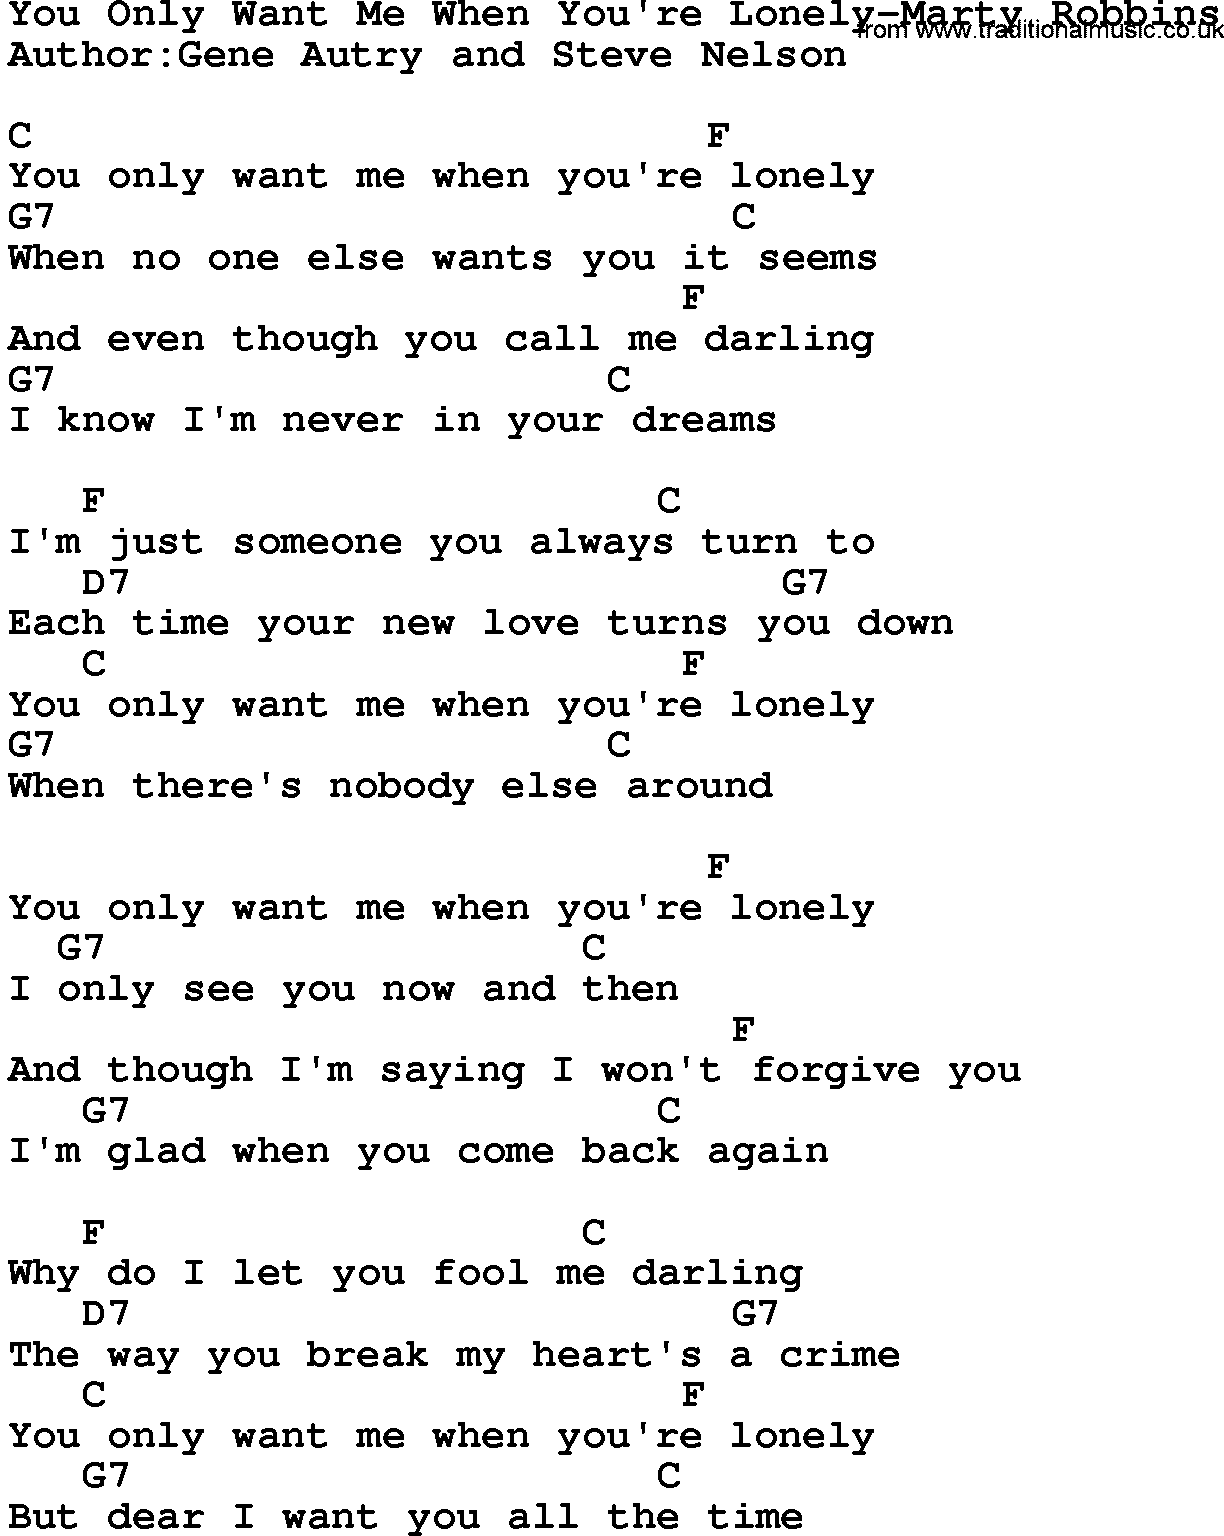 Country music song: You Only Want Me When You're Lonely-Marty Robbins lyrics and chords